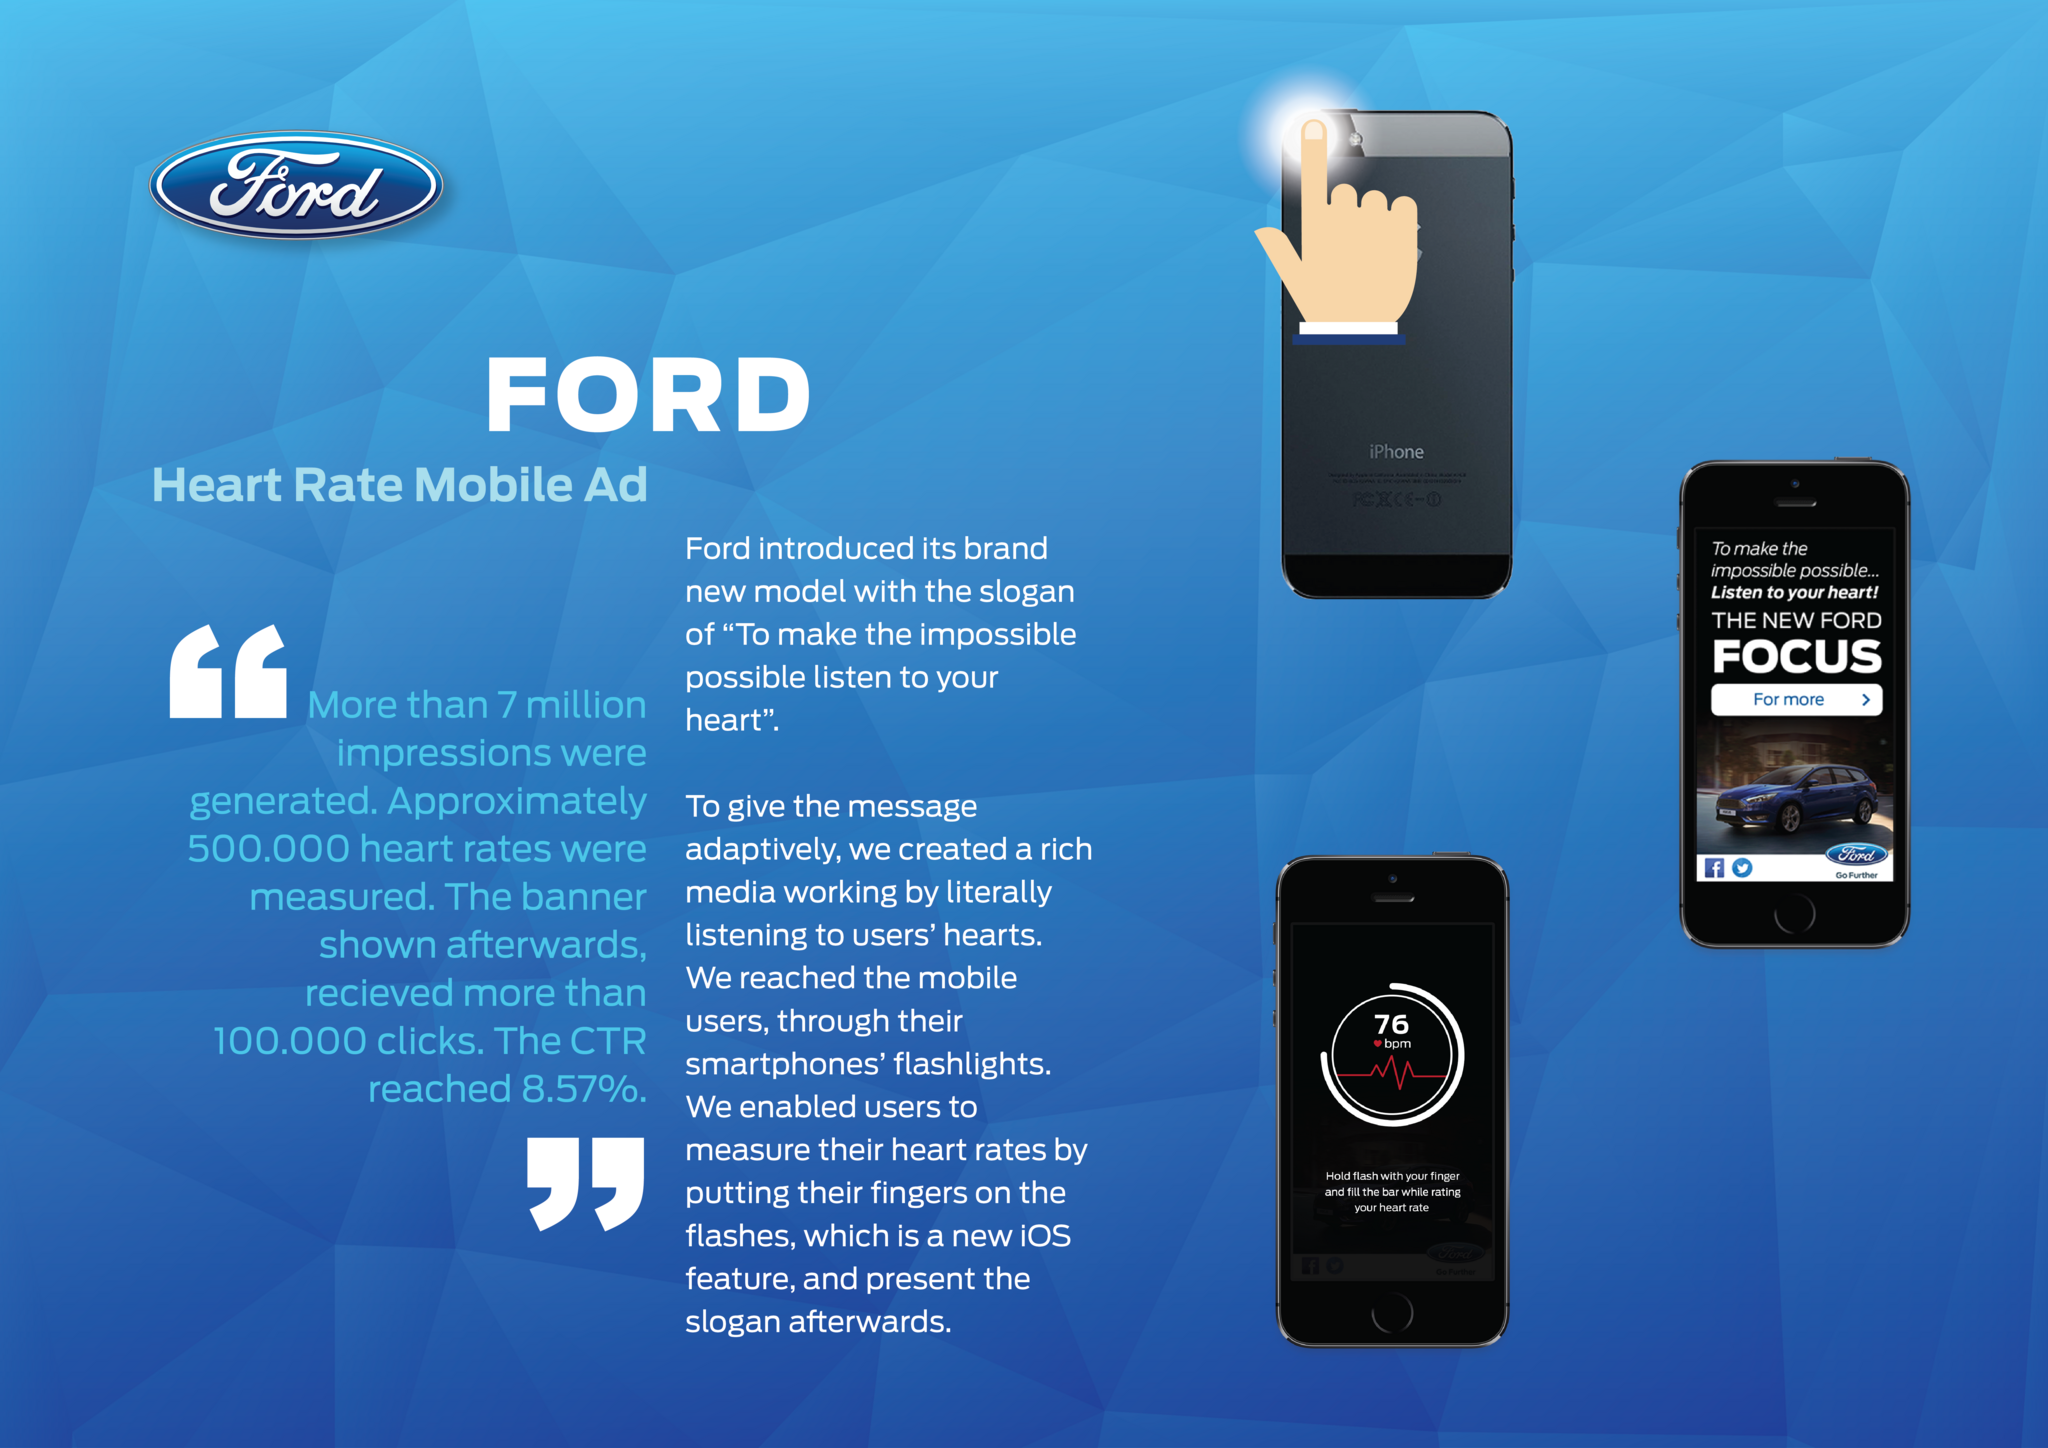 FORD - HEART RATE MOBILE AD